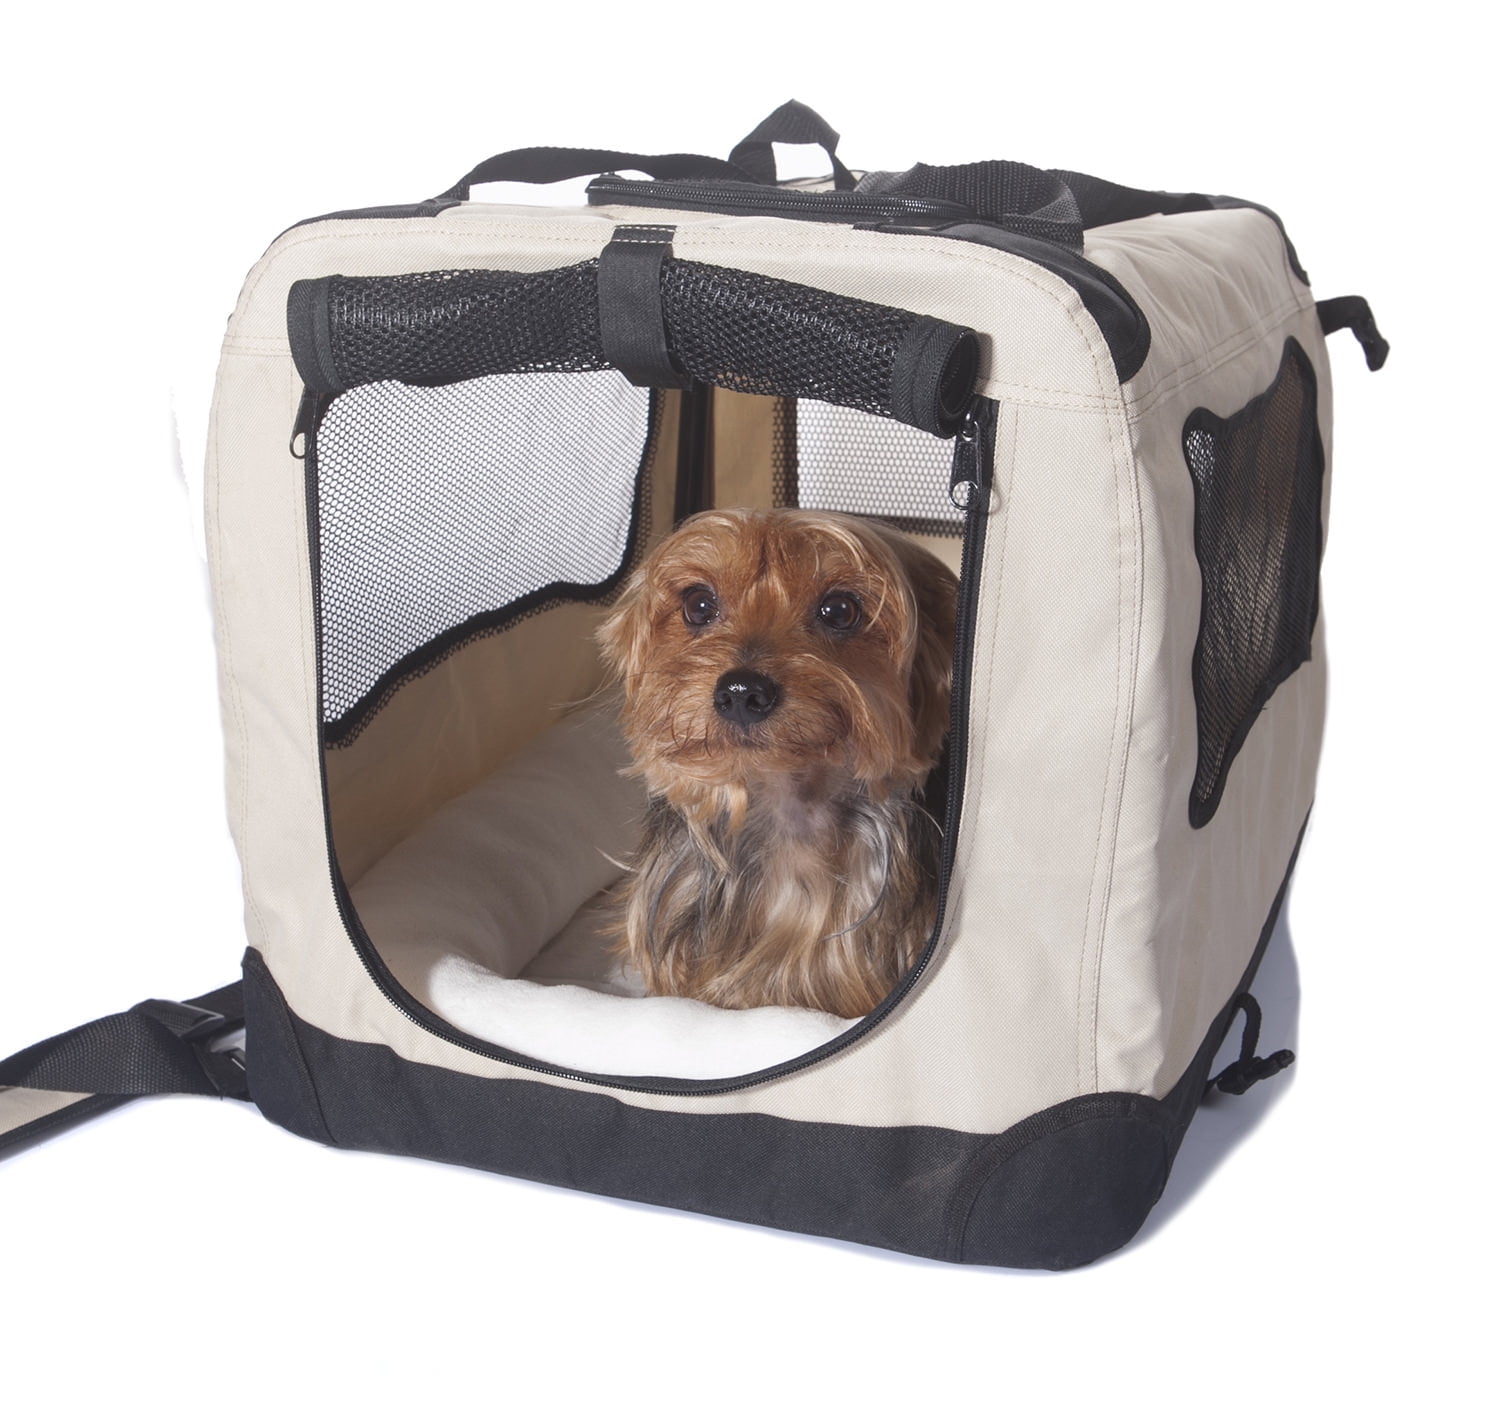 Photo 1 of 2PET Foldable Dog Crate - Soft, Easy to Fold Carry Dog Crate for Indoor Outdoor Use - Comfy Dog Home Dog Travel Crate - Strong Steel Frame, Washable Fabric Cover, Frontal Zipper - Choose yours.